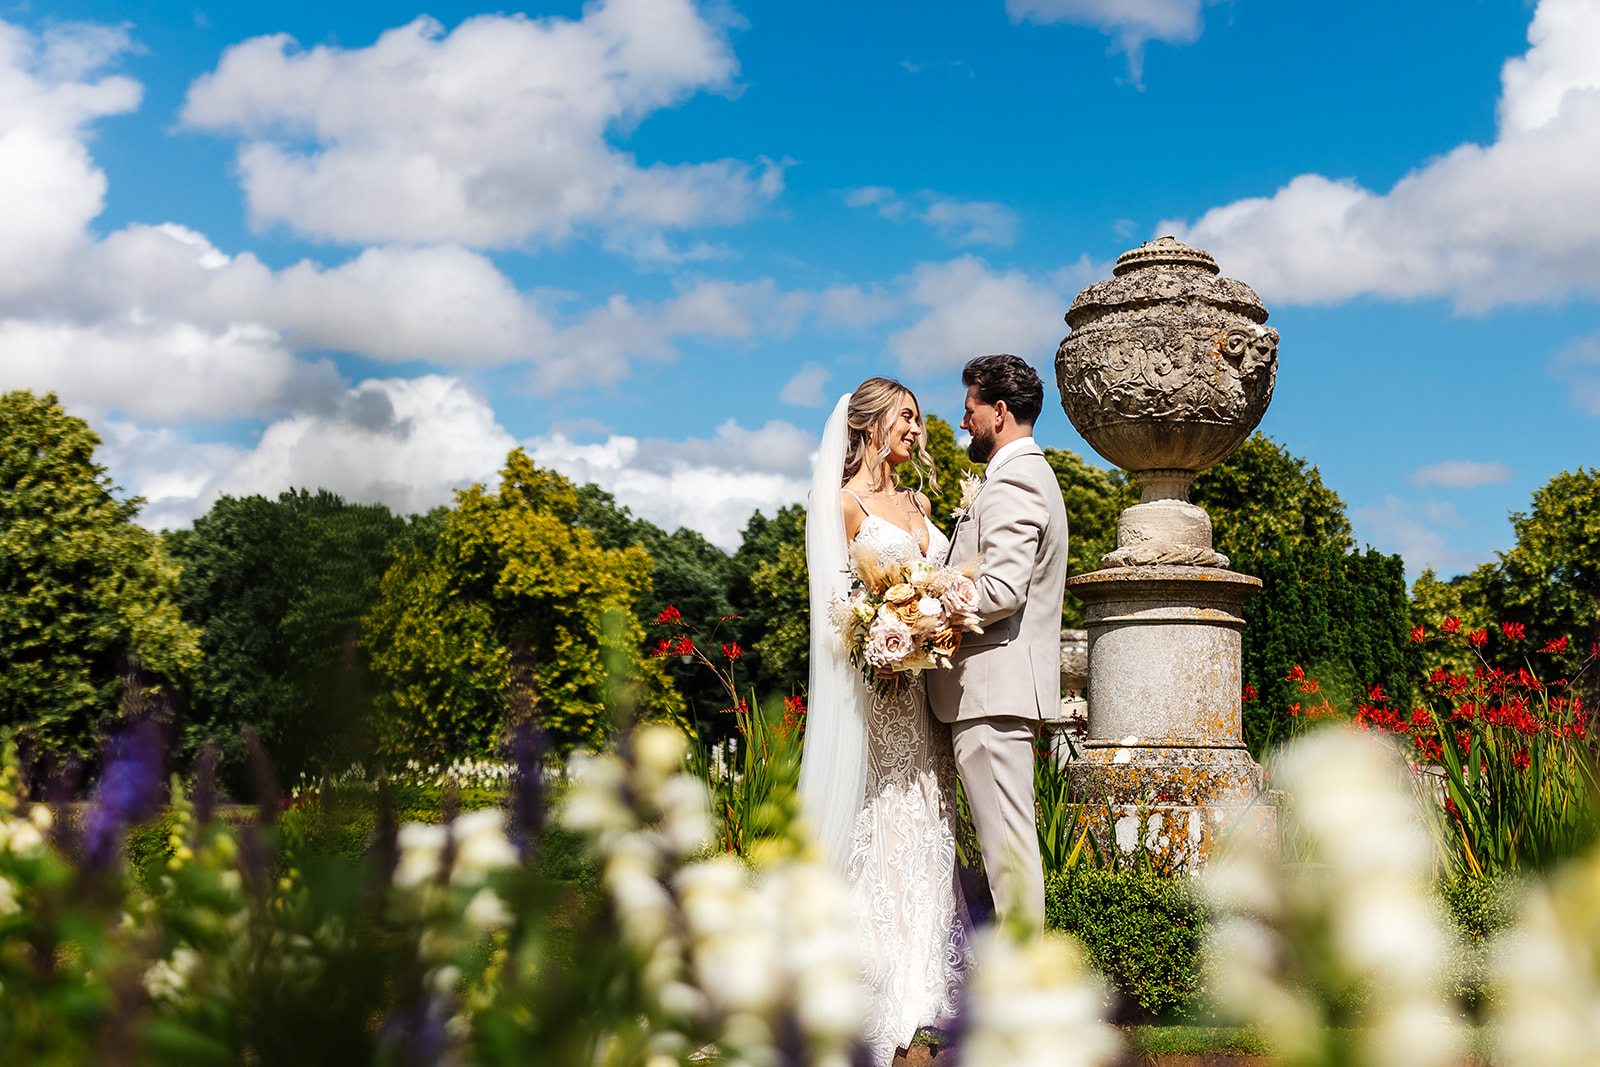 Bride & Groom in the grounds of Ashridge House, colourful flowers surround them